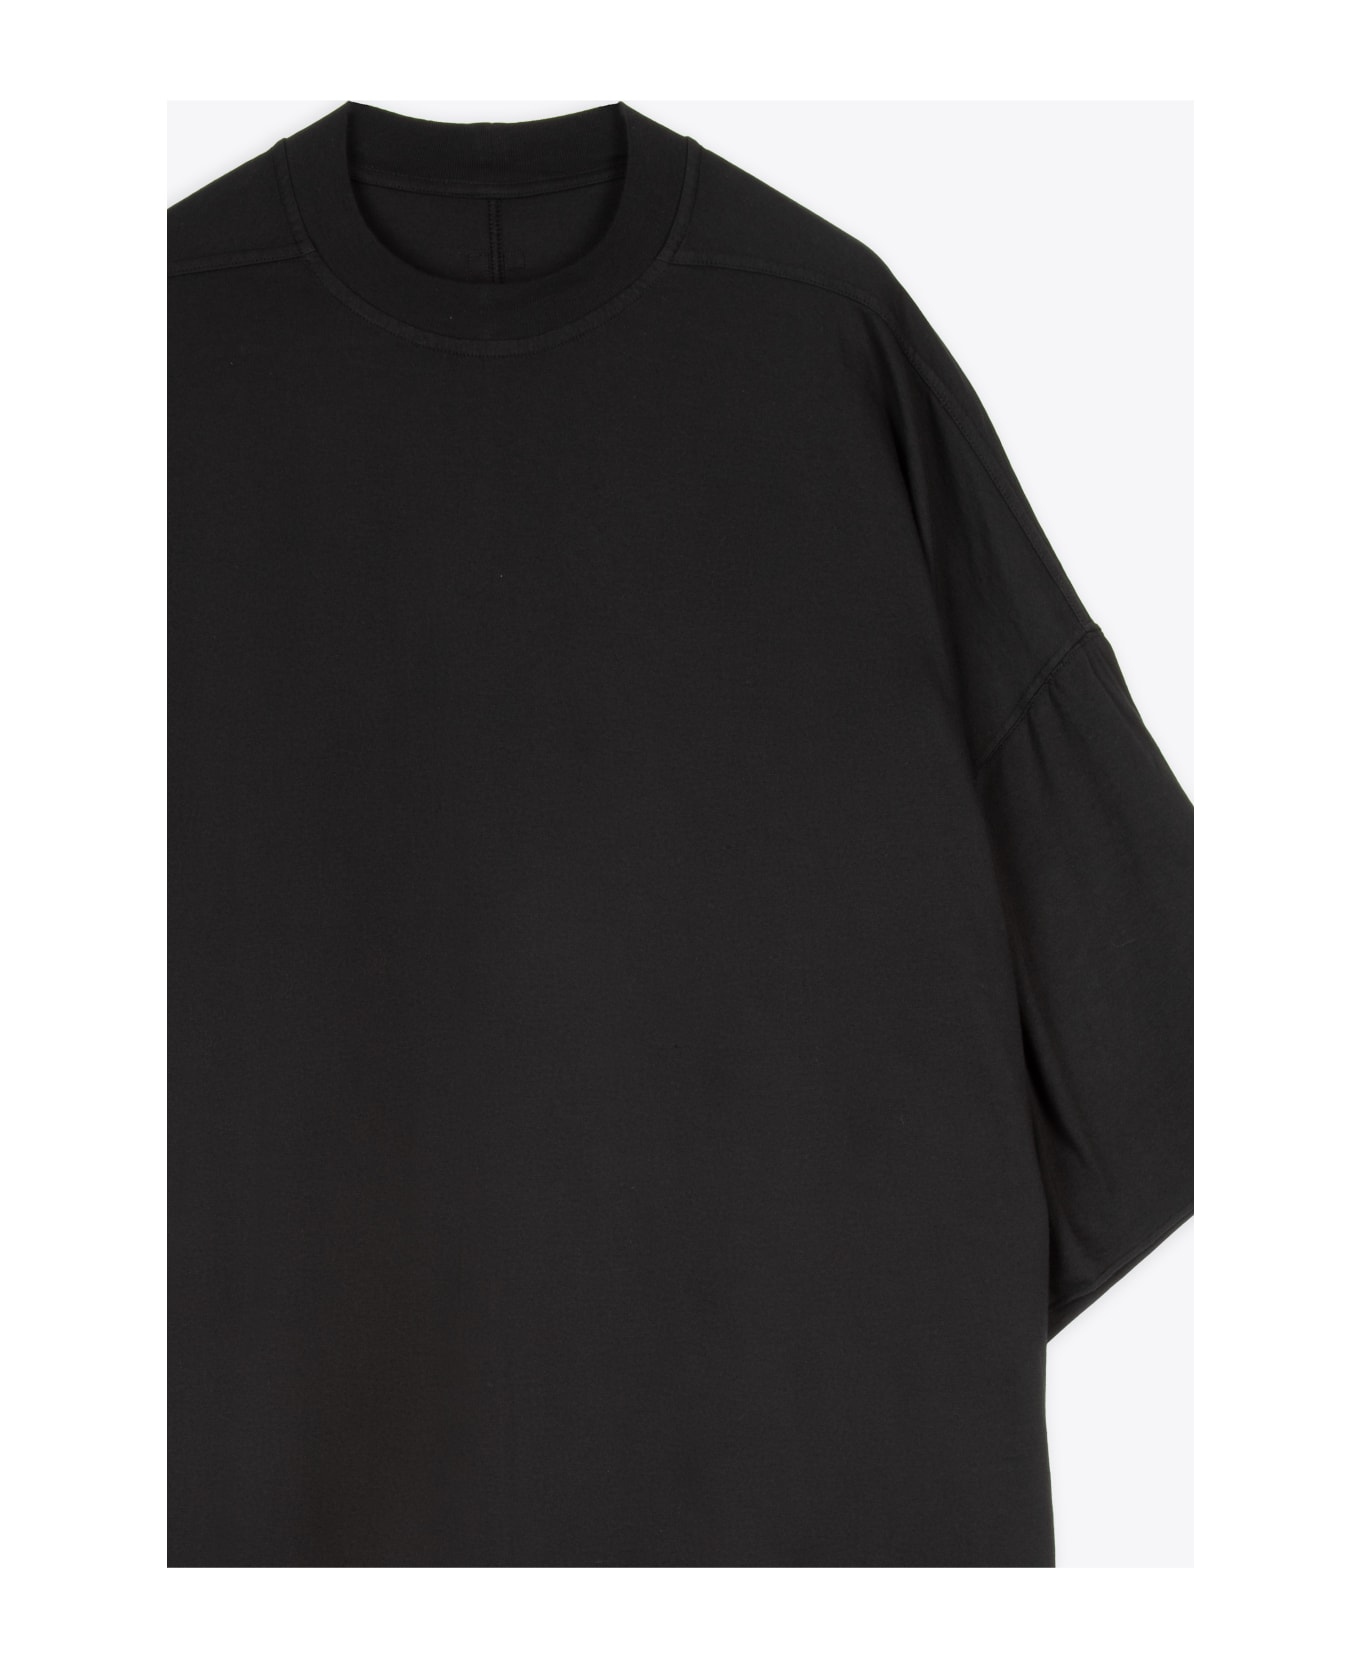 DRKSHDW Tommy T Black Cotton Oversized T-shirt With Raw-cut Hems - Tommy T - BLACK